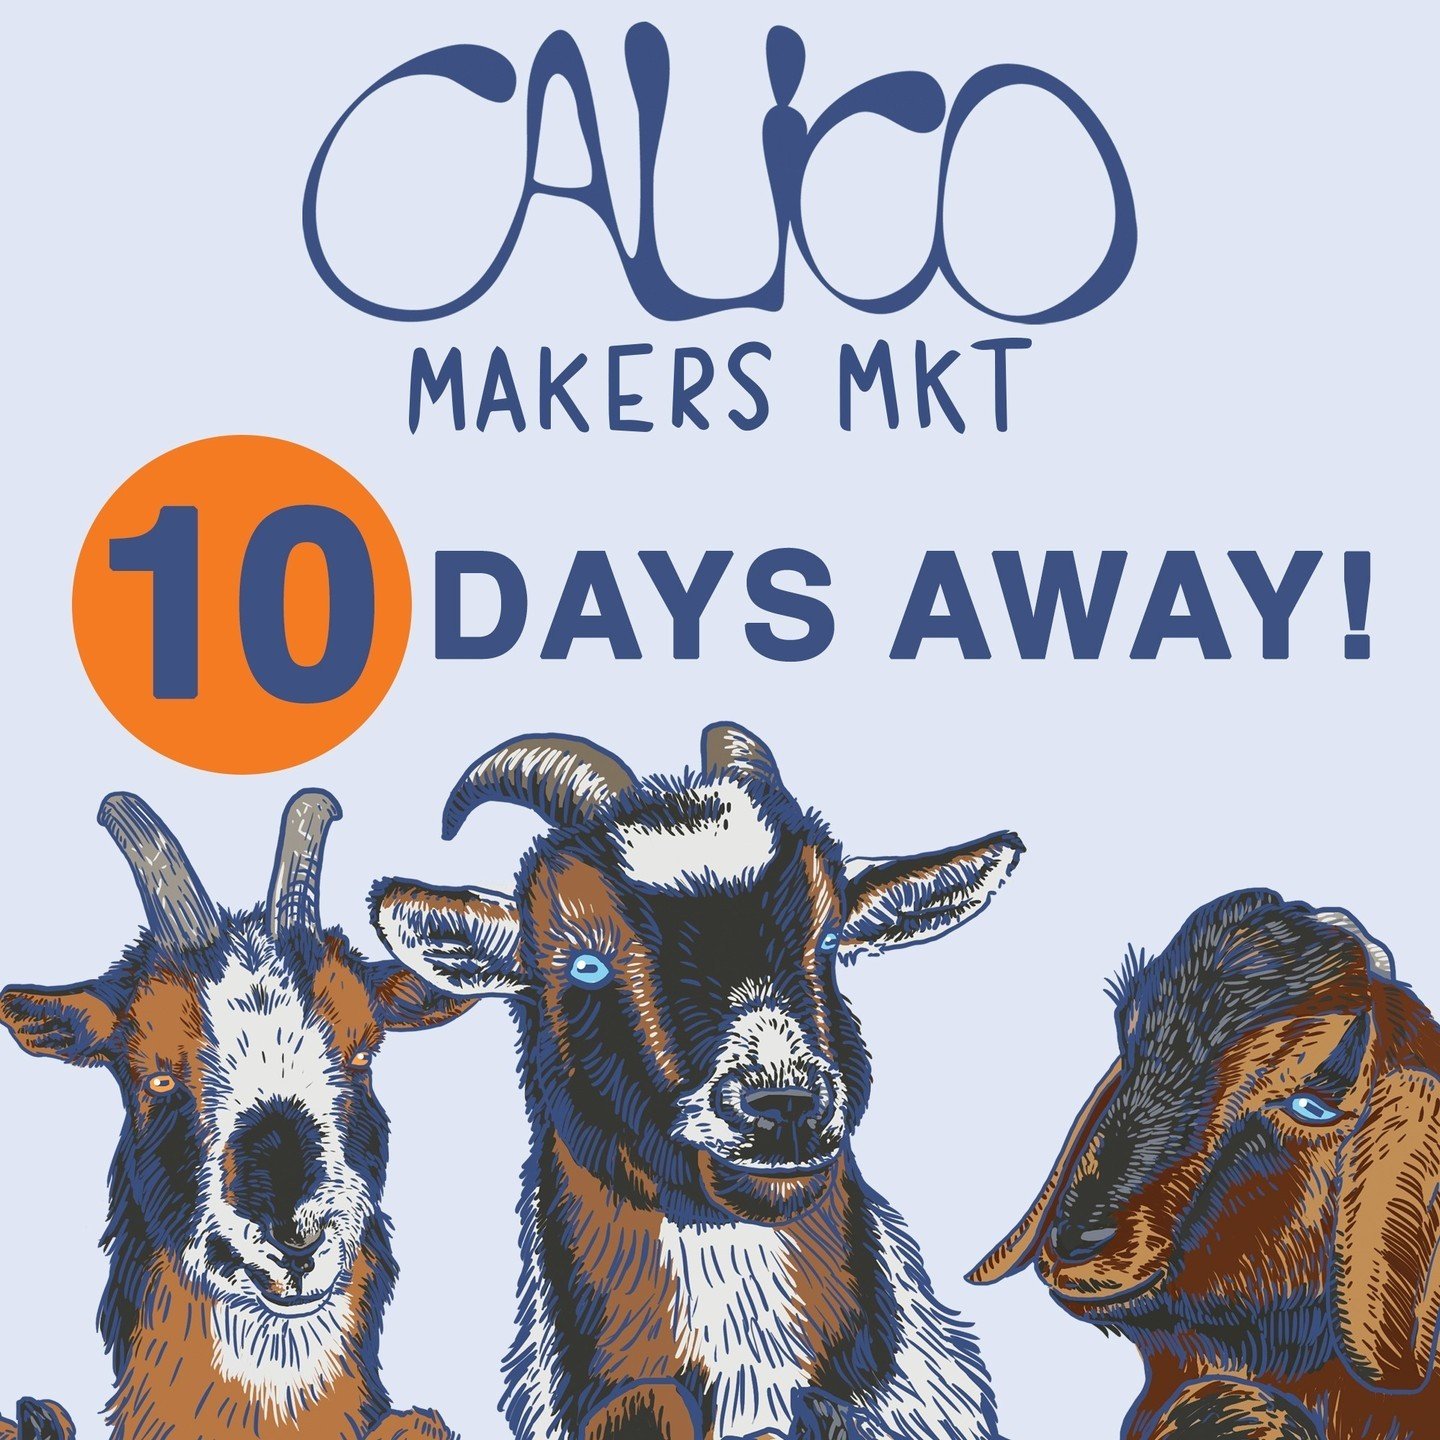 Its as the graphic says: 10 days until our spring makers market! We can't wait to see you all and spend time celebrating the arts together 🤩🎨✏️🎸🪡🖼️ ⁠
.⁠
.⁠
.⁠
#ncmakersmarket #makersmarket #ncartists #ncdesigner #livemusic #ncevents #chapelhille